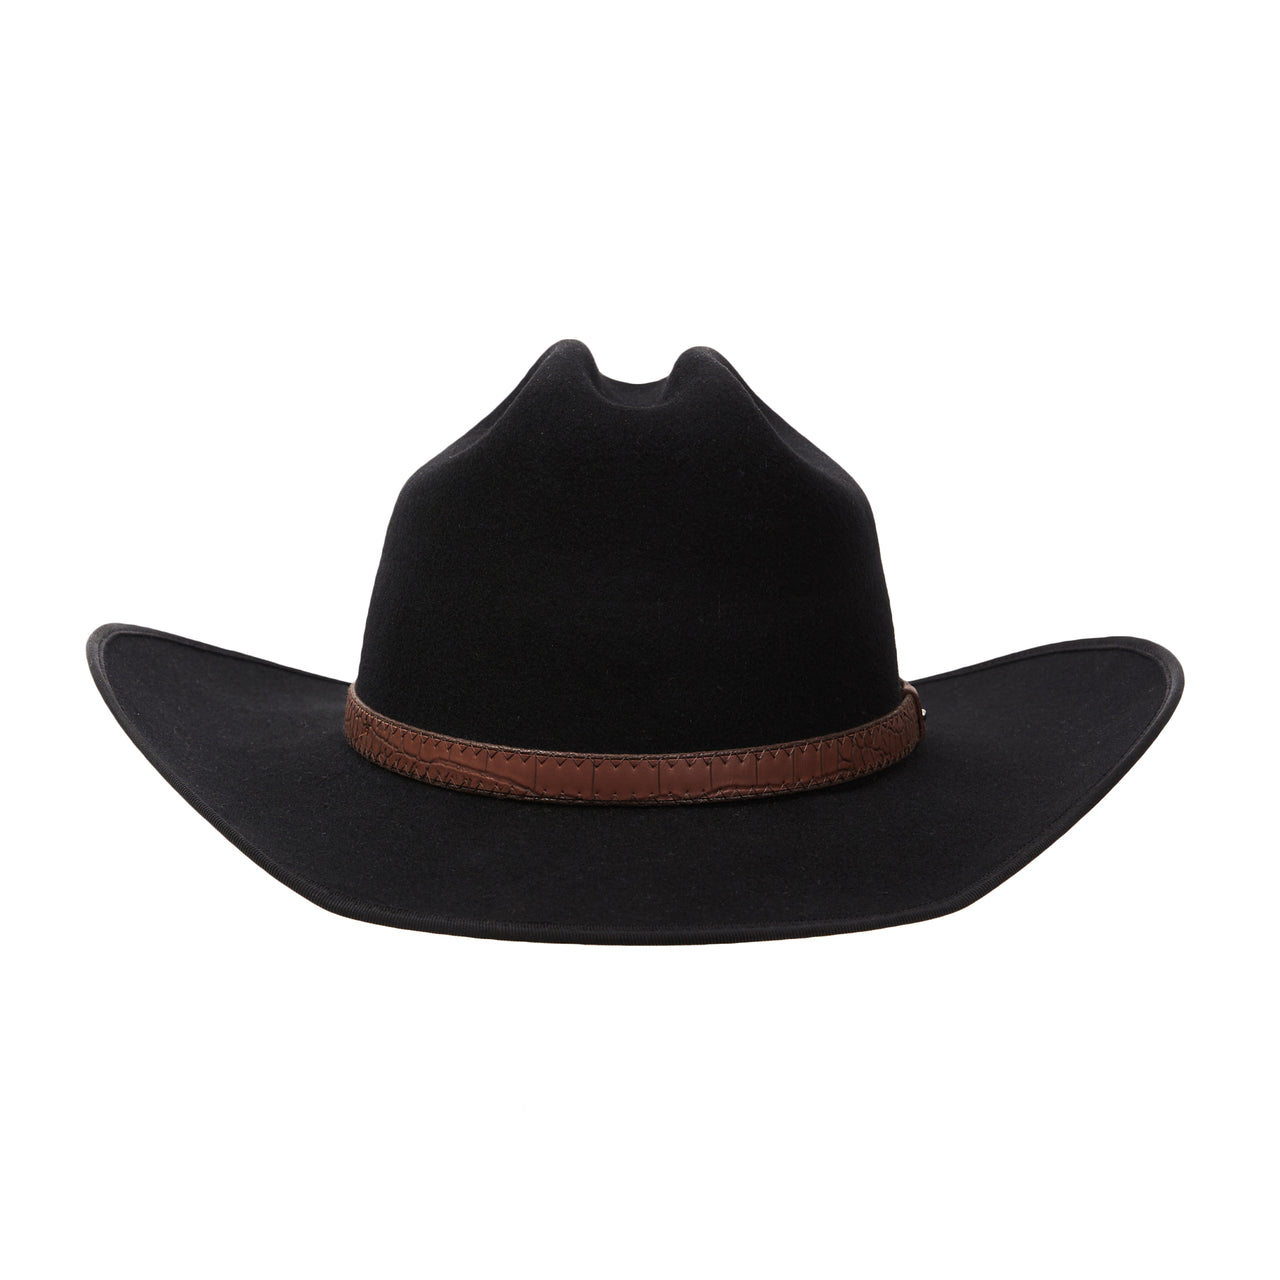 City Hatters Rodeo hat